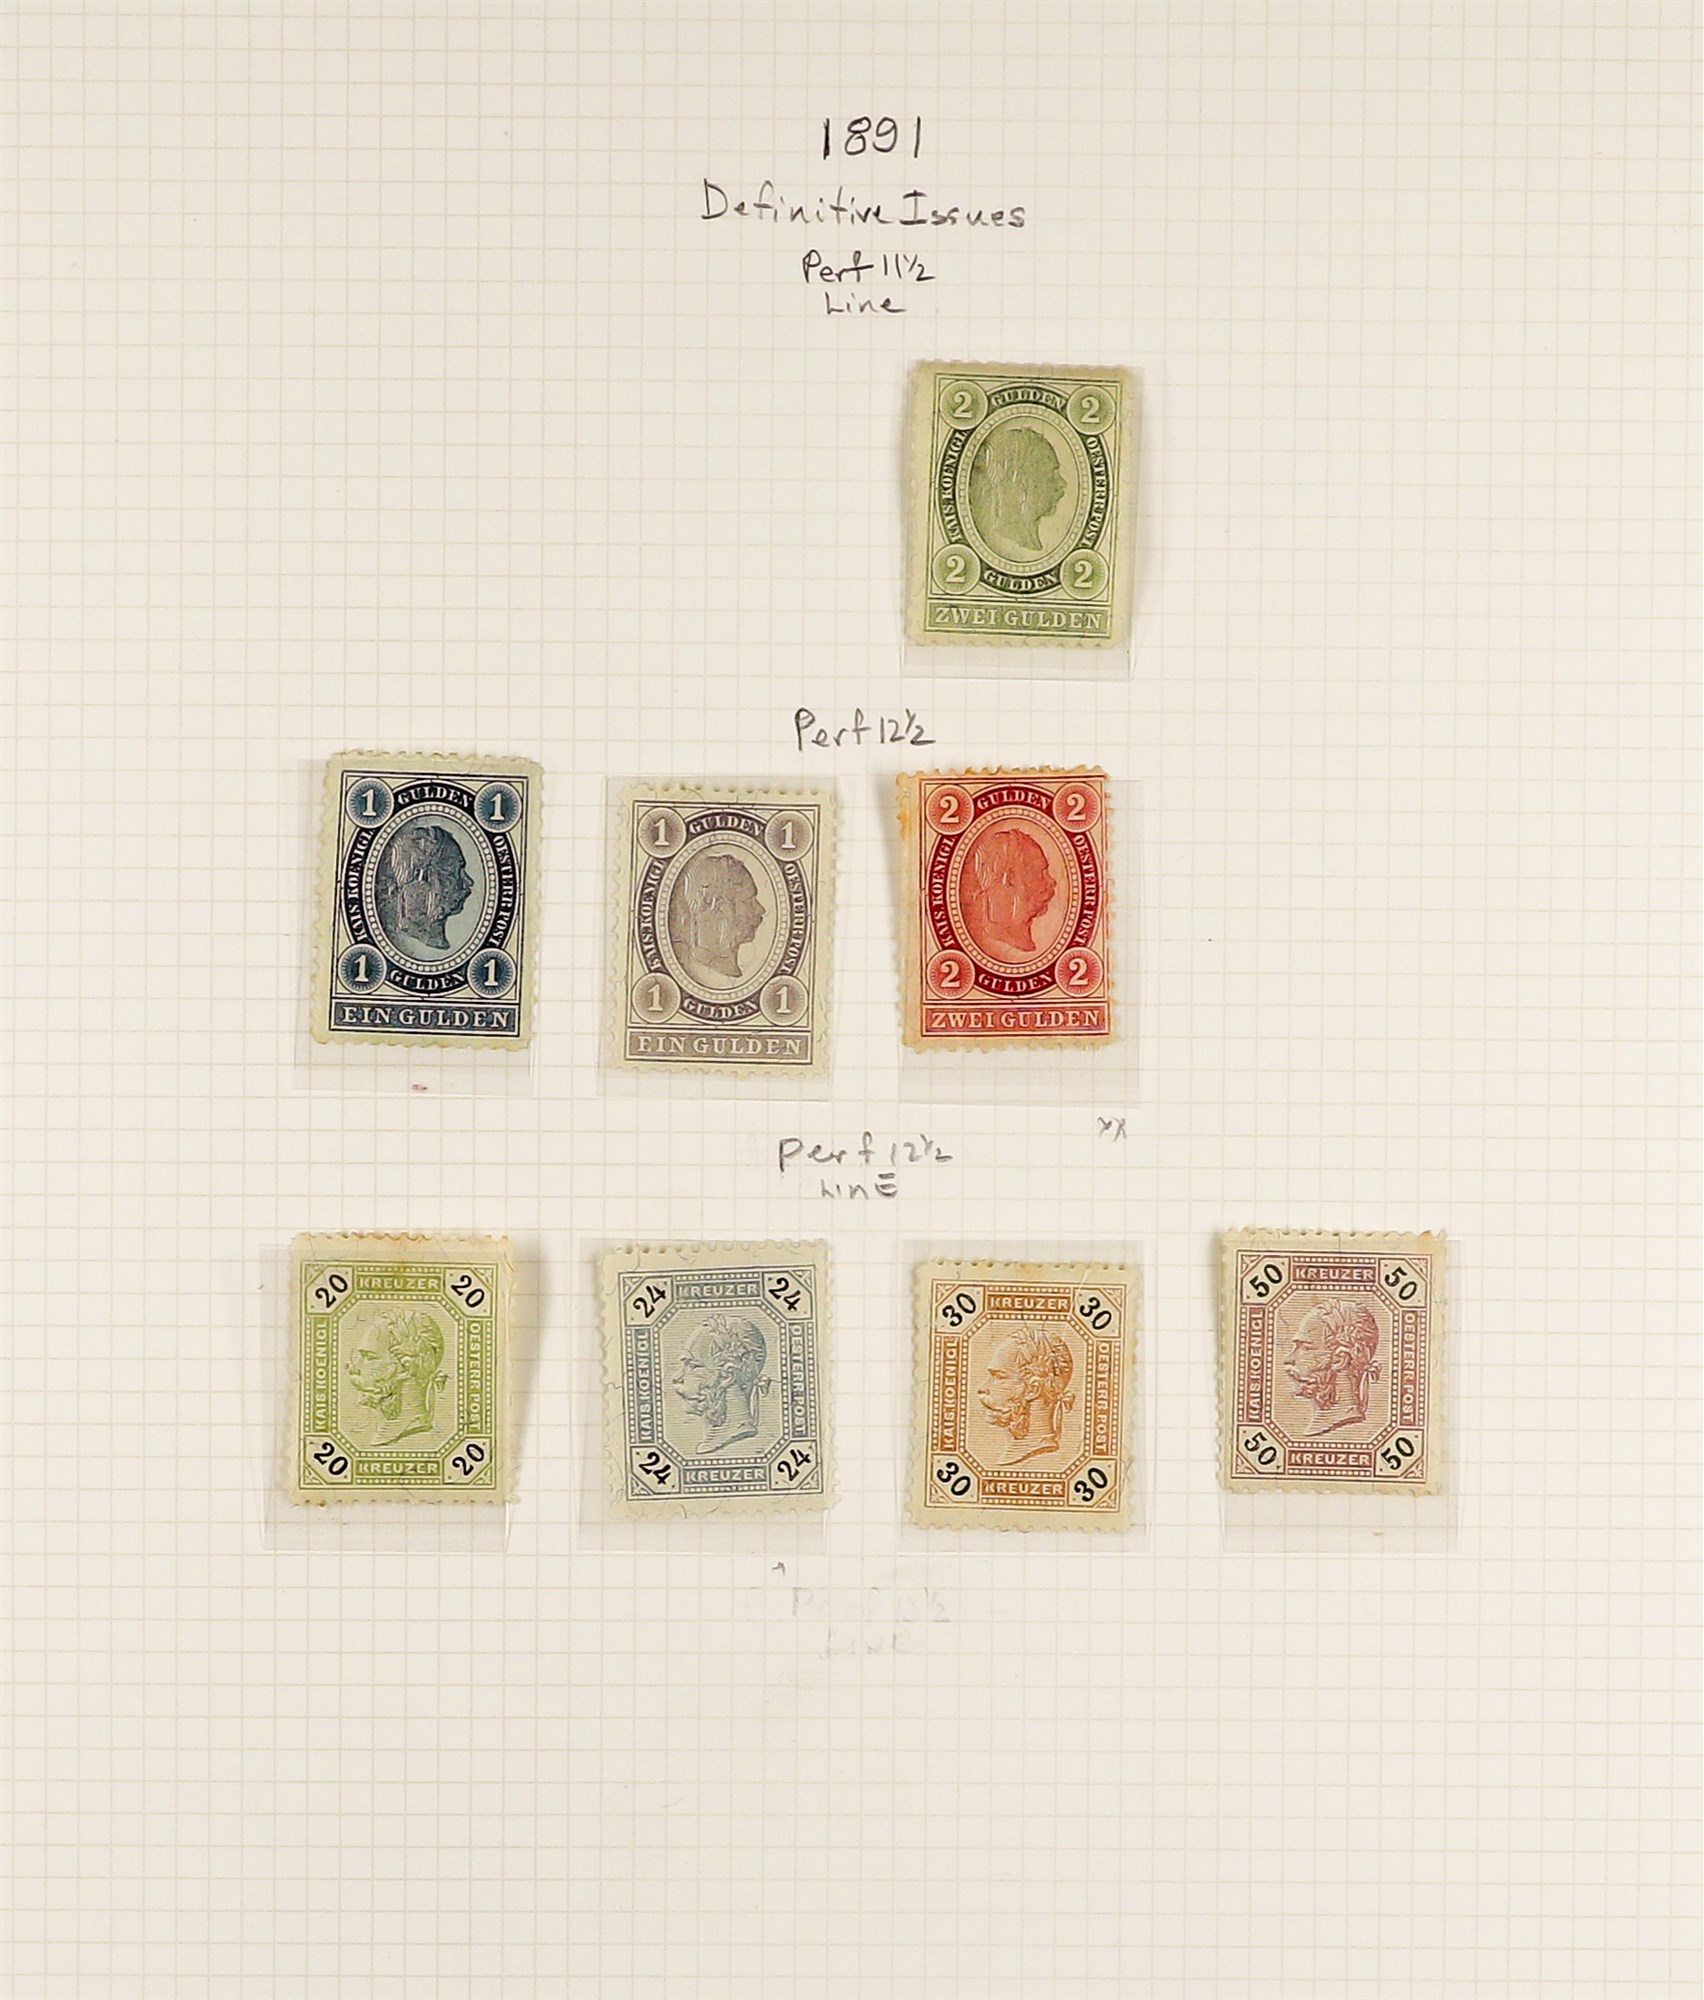 AUSTRIA 1890 - 1907 FRANZ JOSEF DEFINITIVES collection of over 180 mint / some never hinged mint - Image 5 of 11